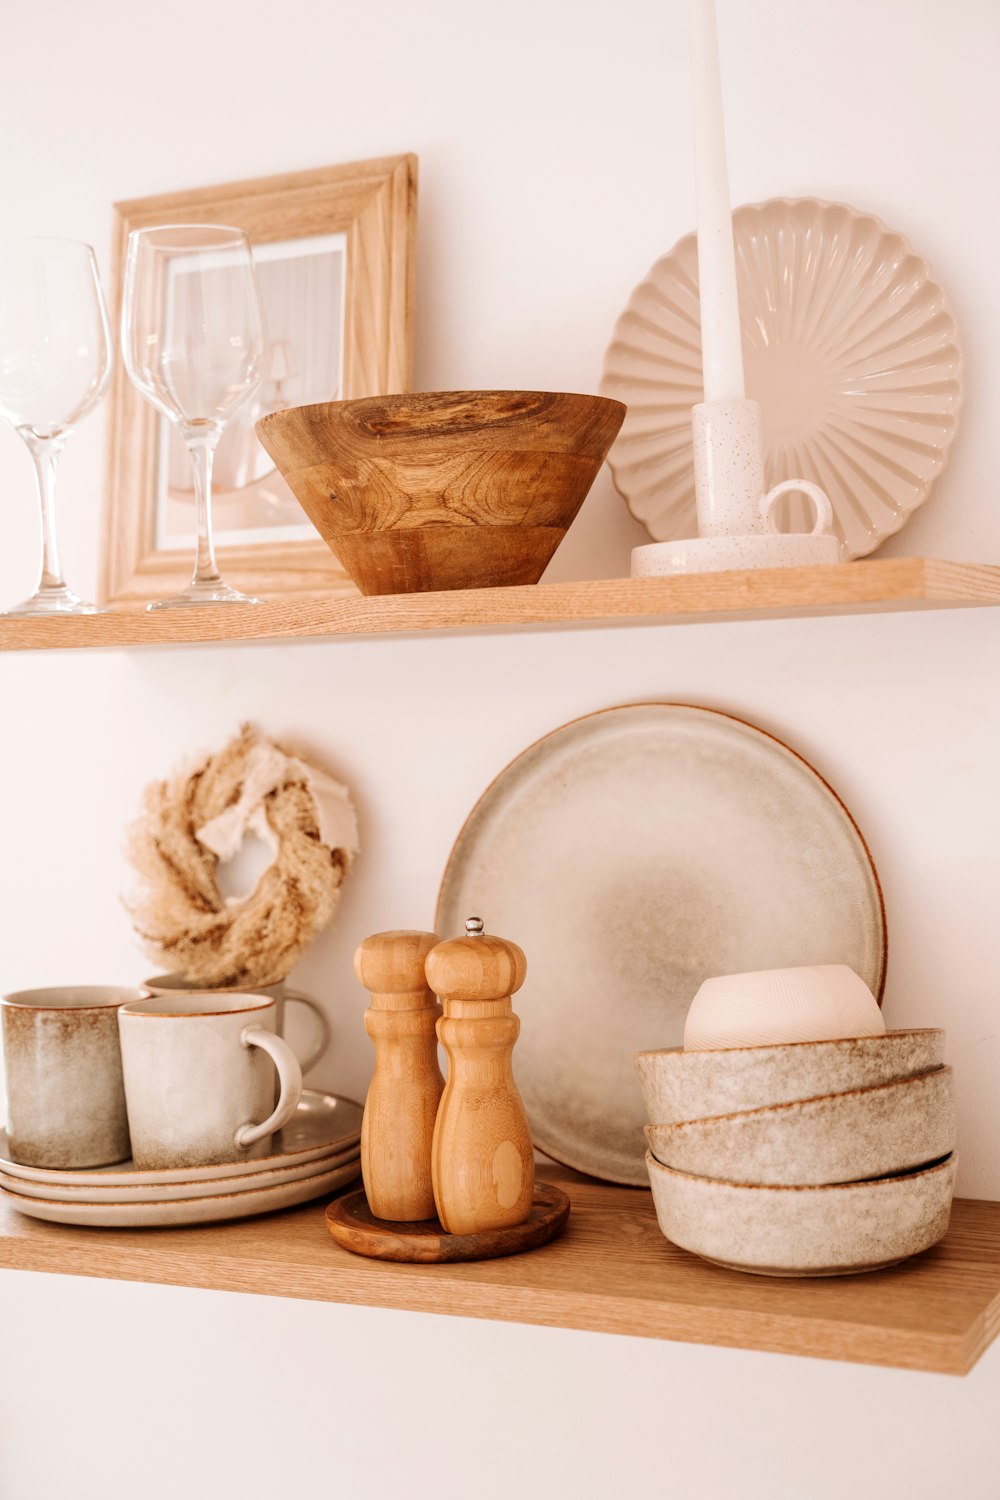 a shelf filled with dishes and plates on top of a wooden shelf